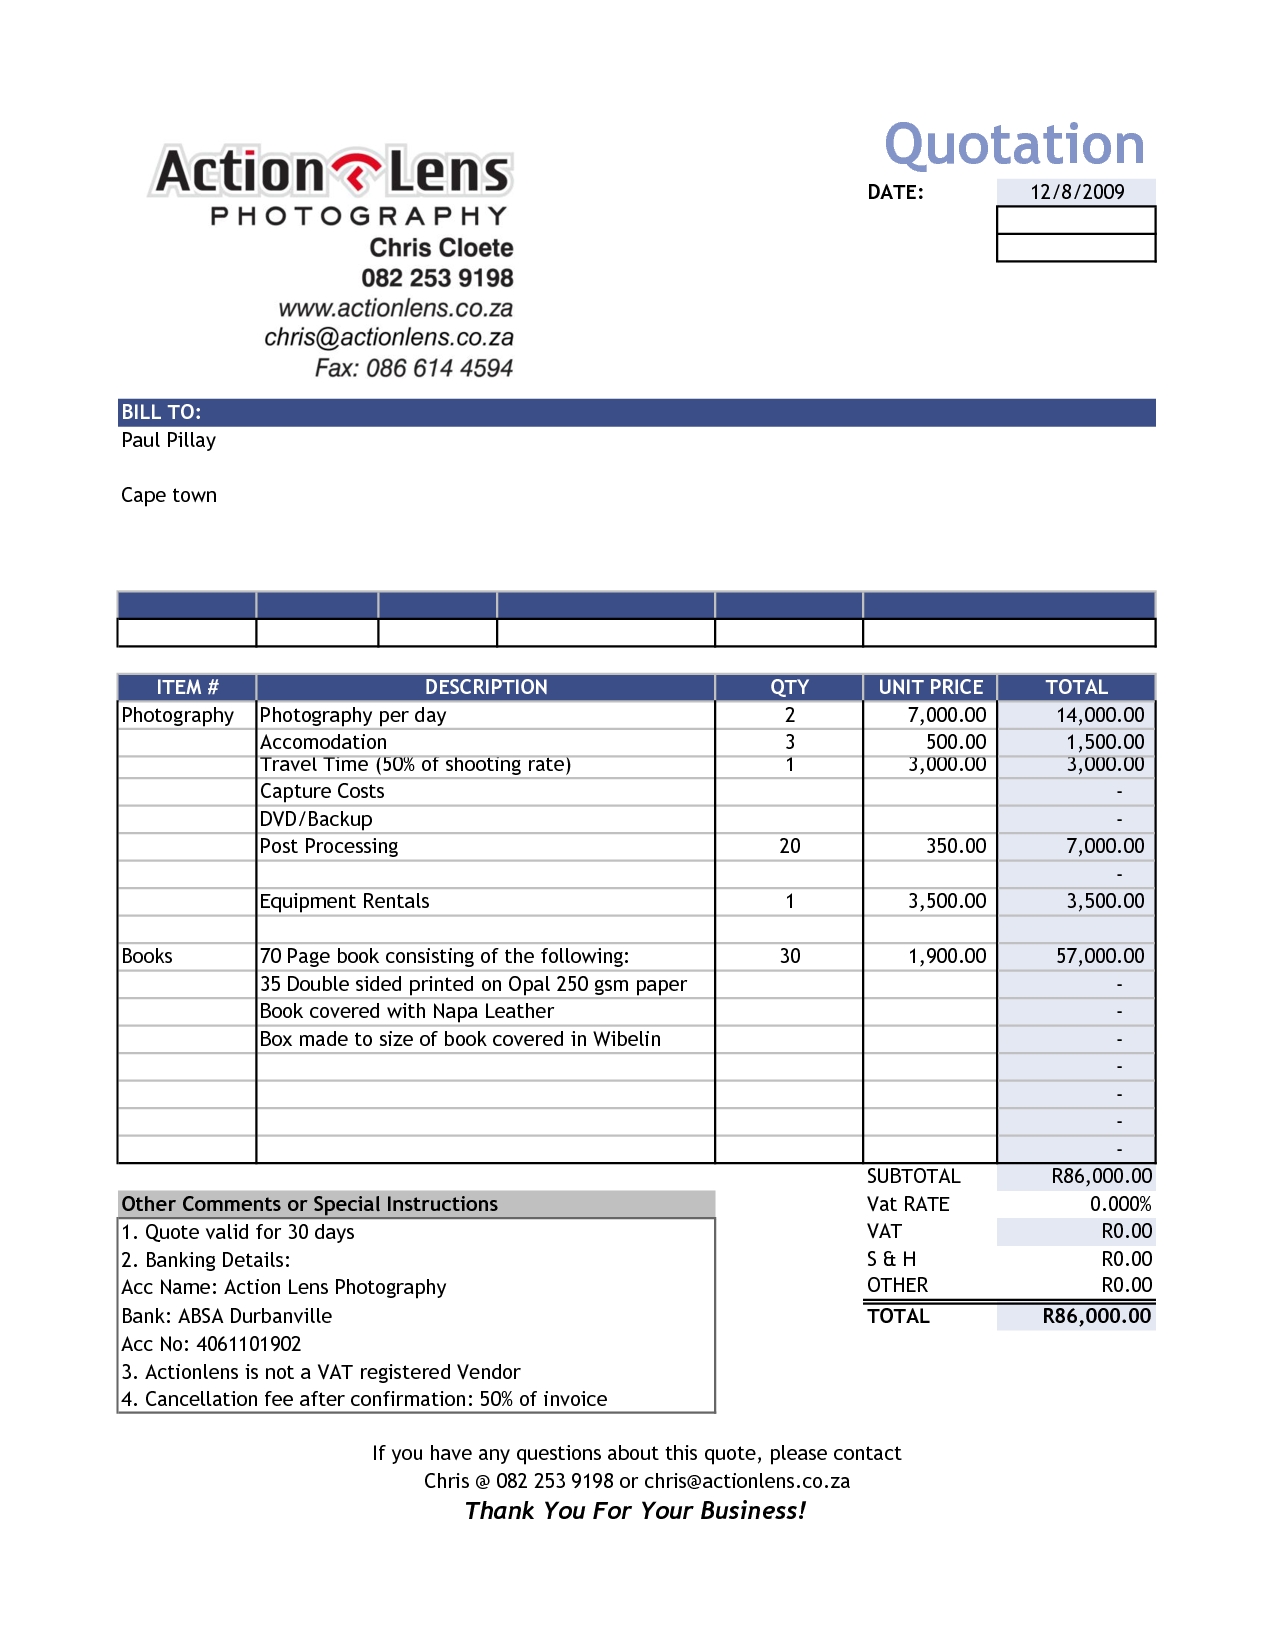 sales invoice template invoice templat free sale invoice forms sales invoice templates